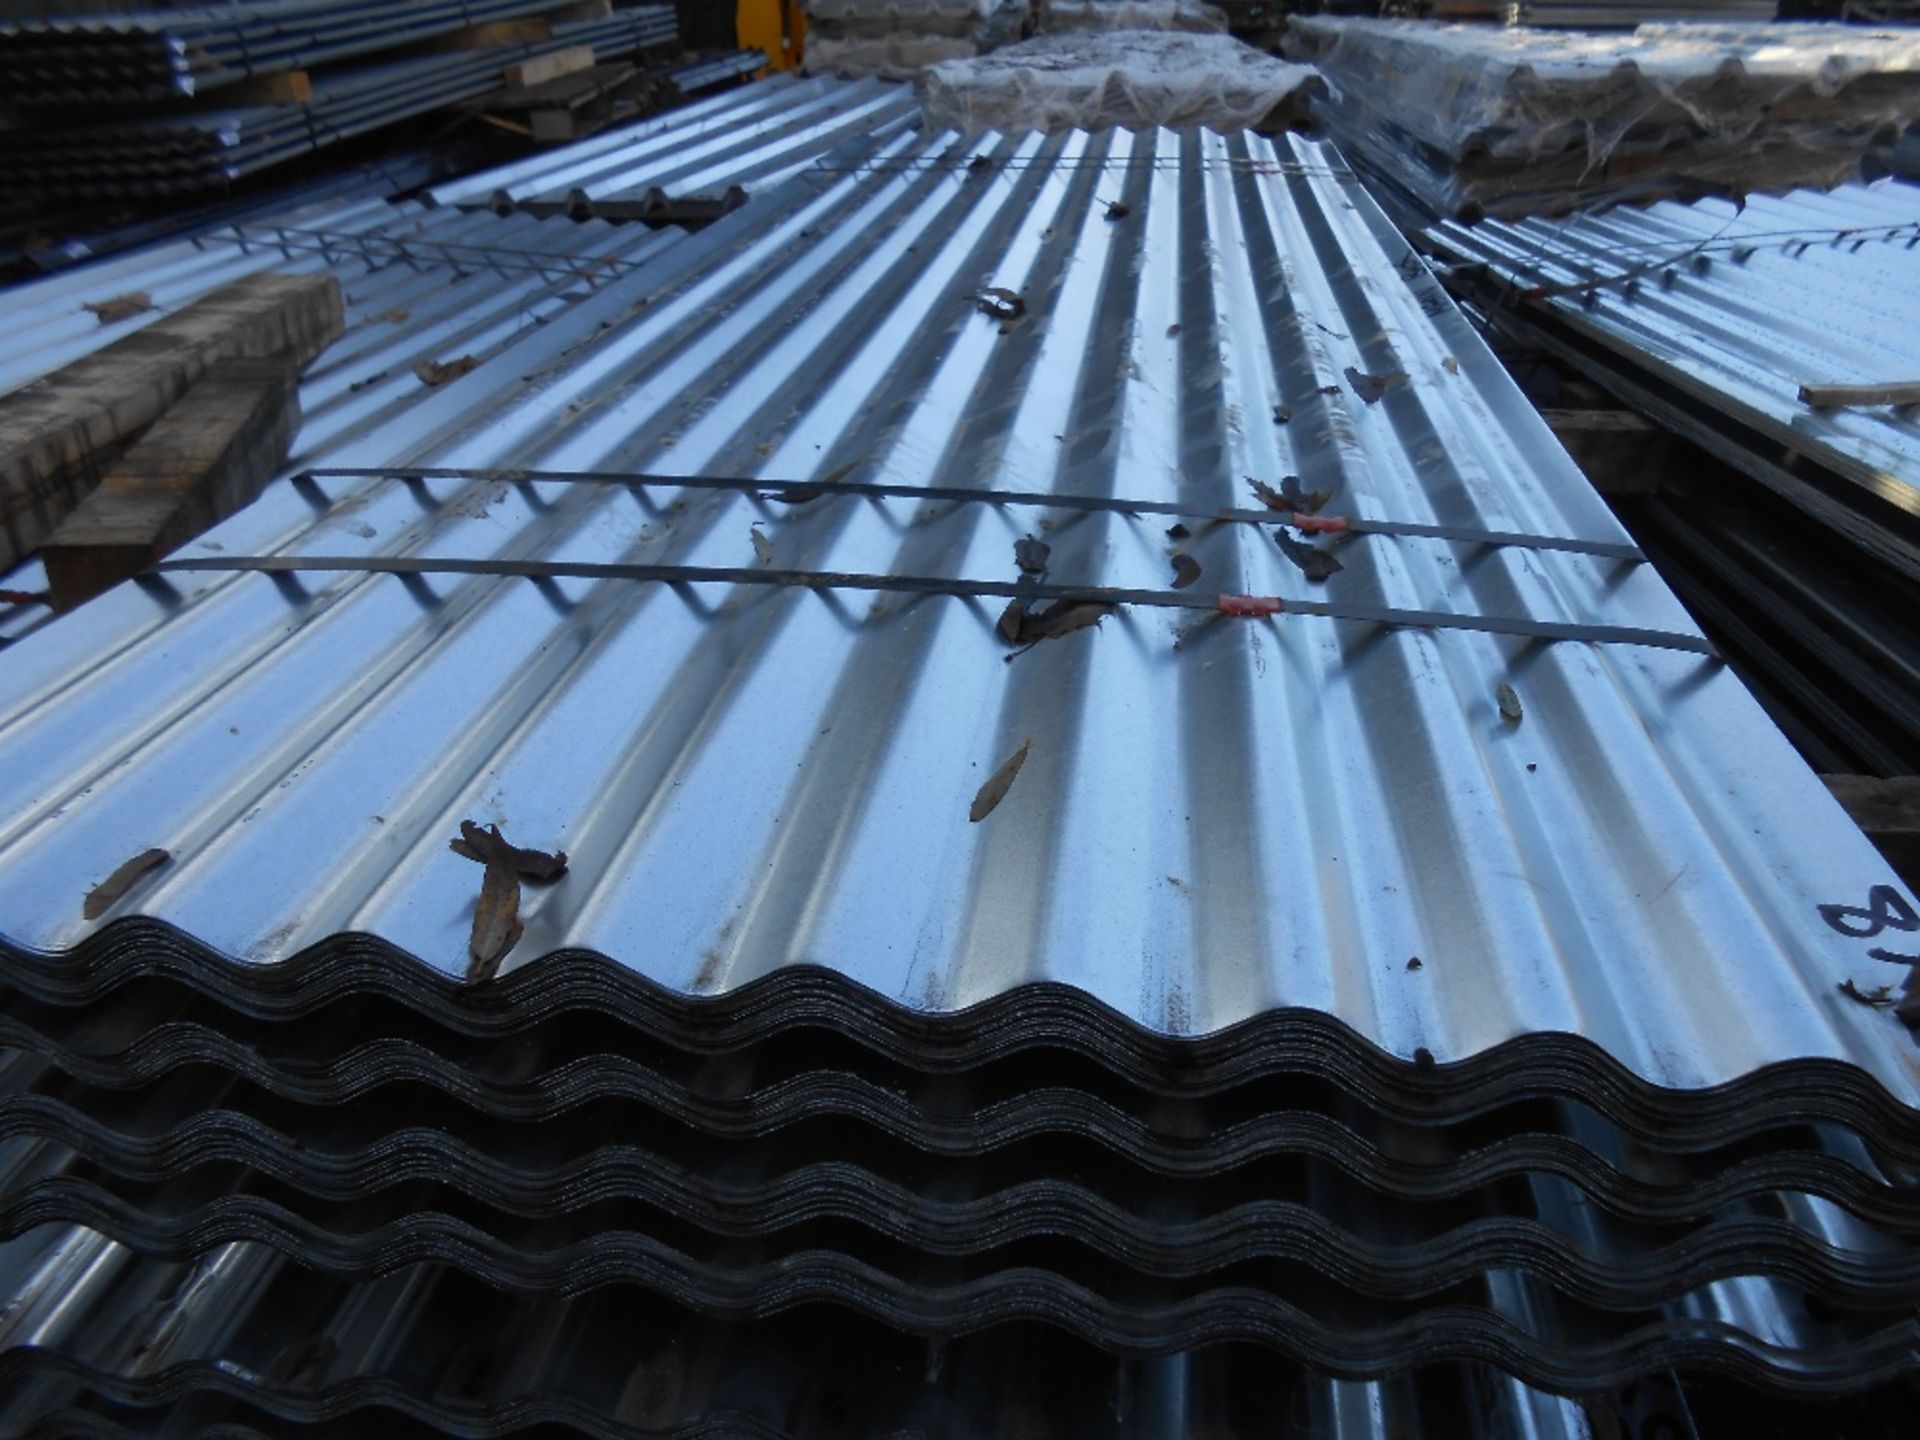 Pack of 25no. 12ft galvanised corrugated roof sheets. 82cm wide